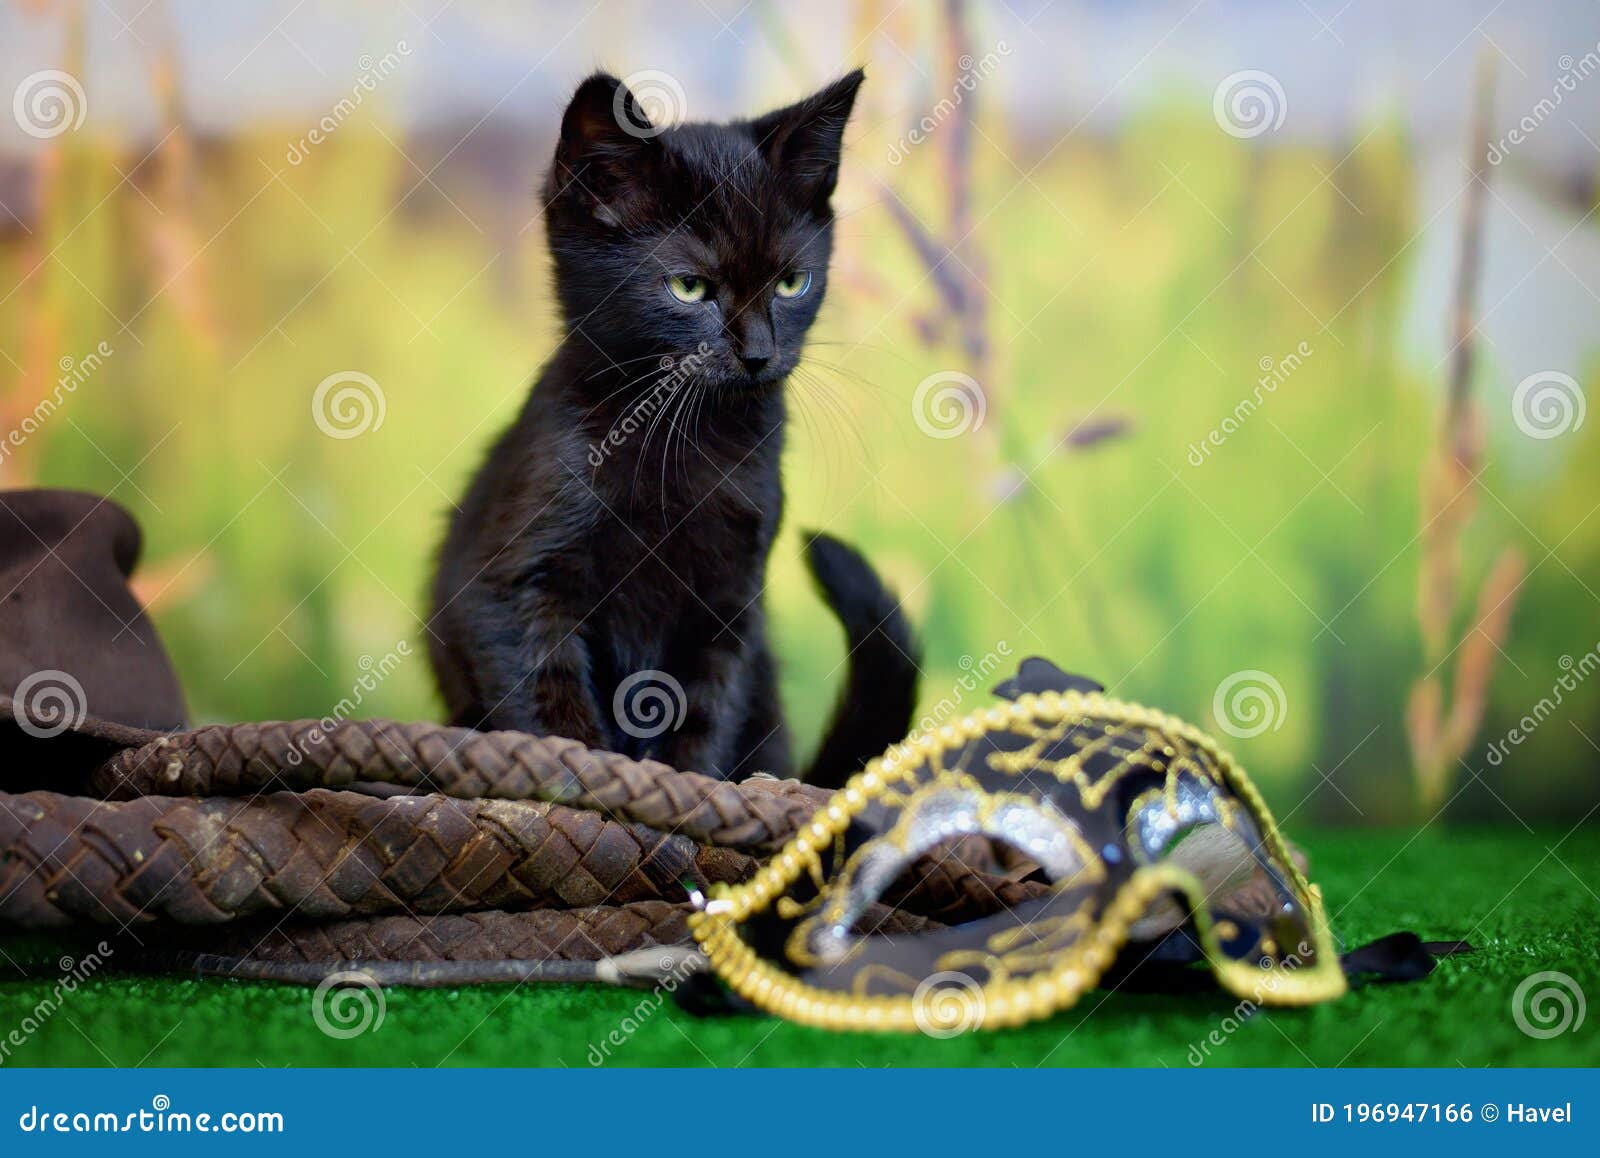 black cat sitting on a green background with a hat and a whip